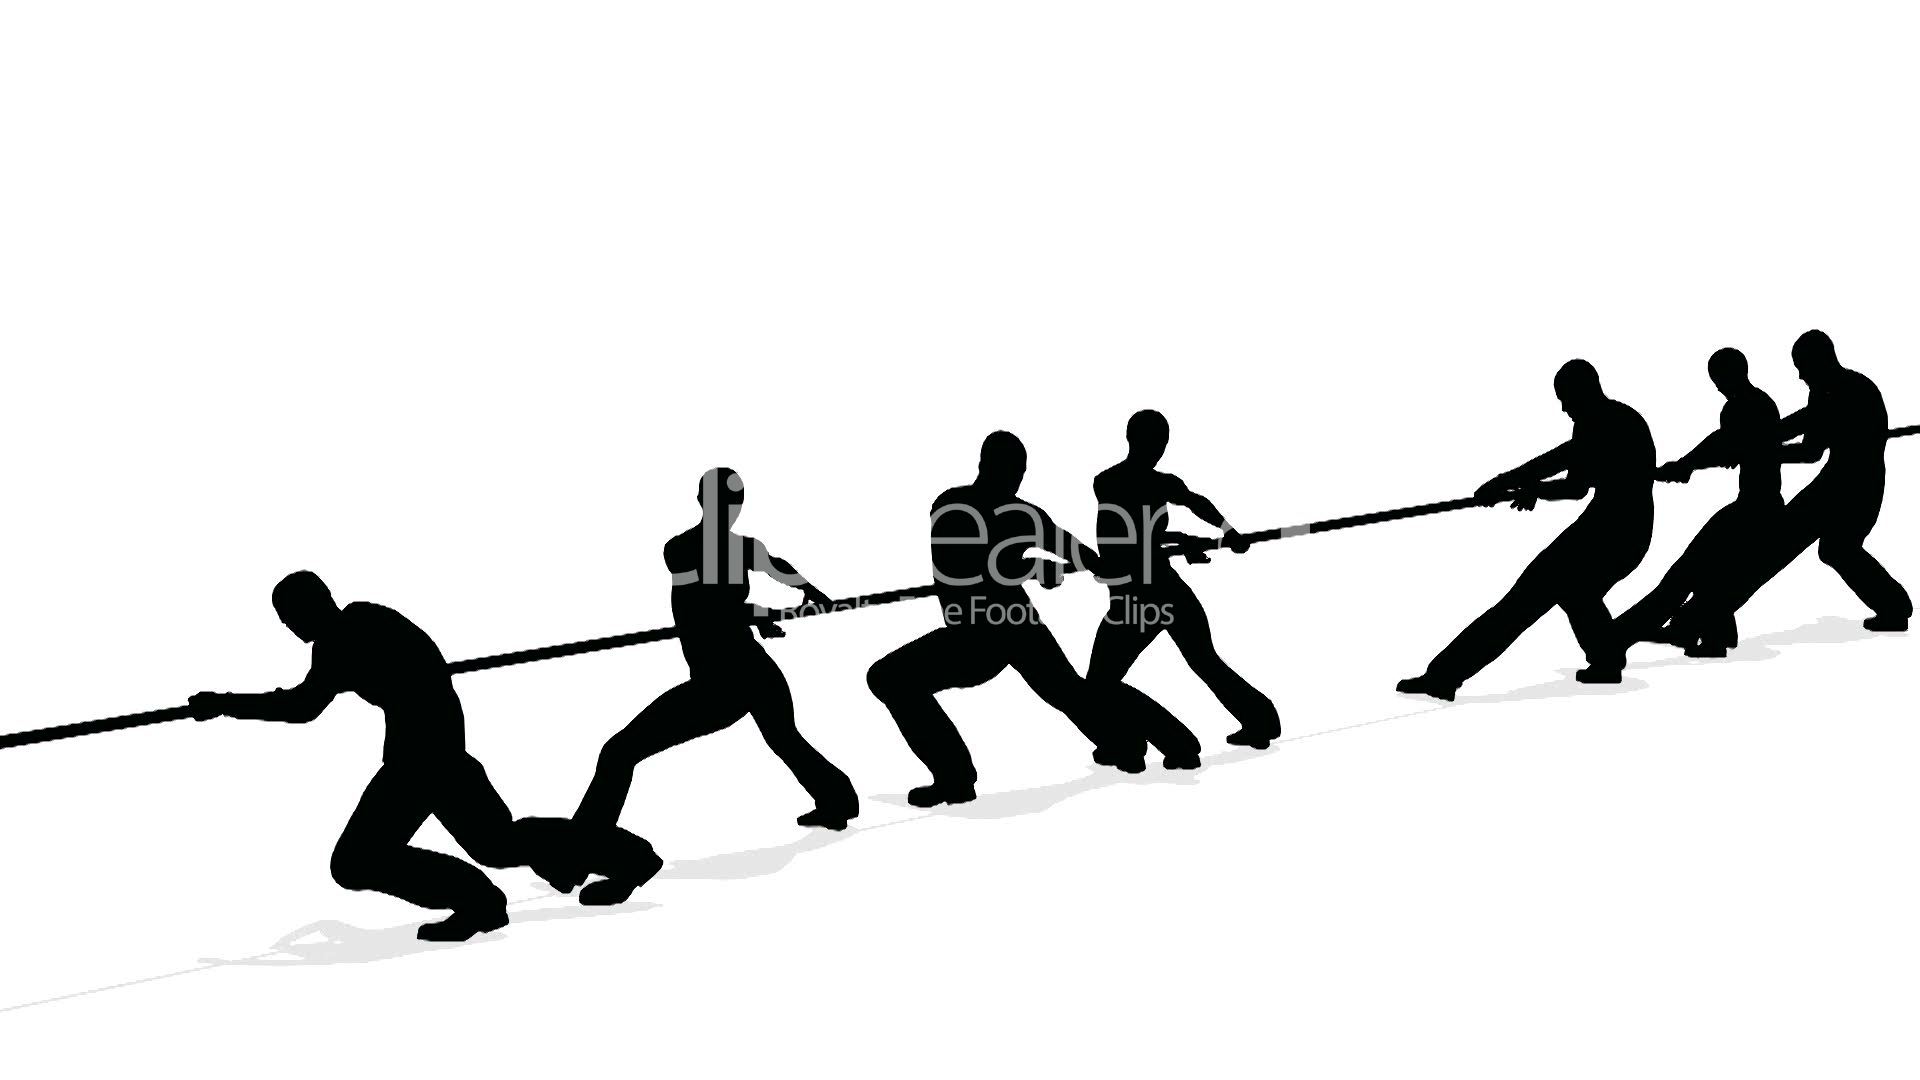 tug-of-war people silhouette: Royalty-free video and stock footage